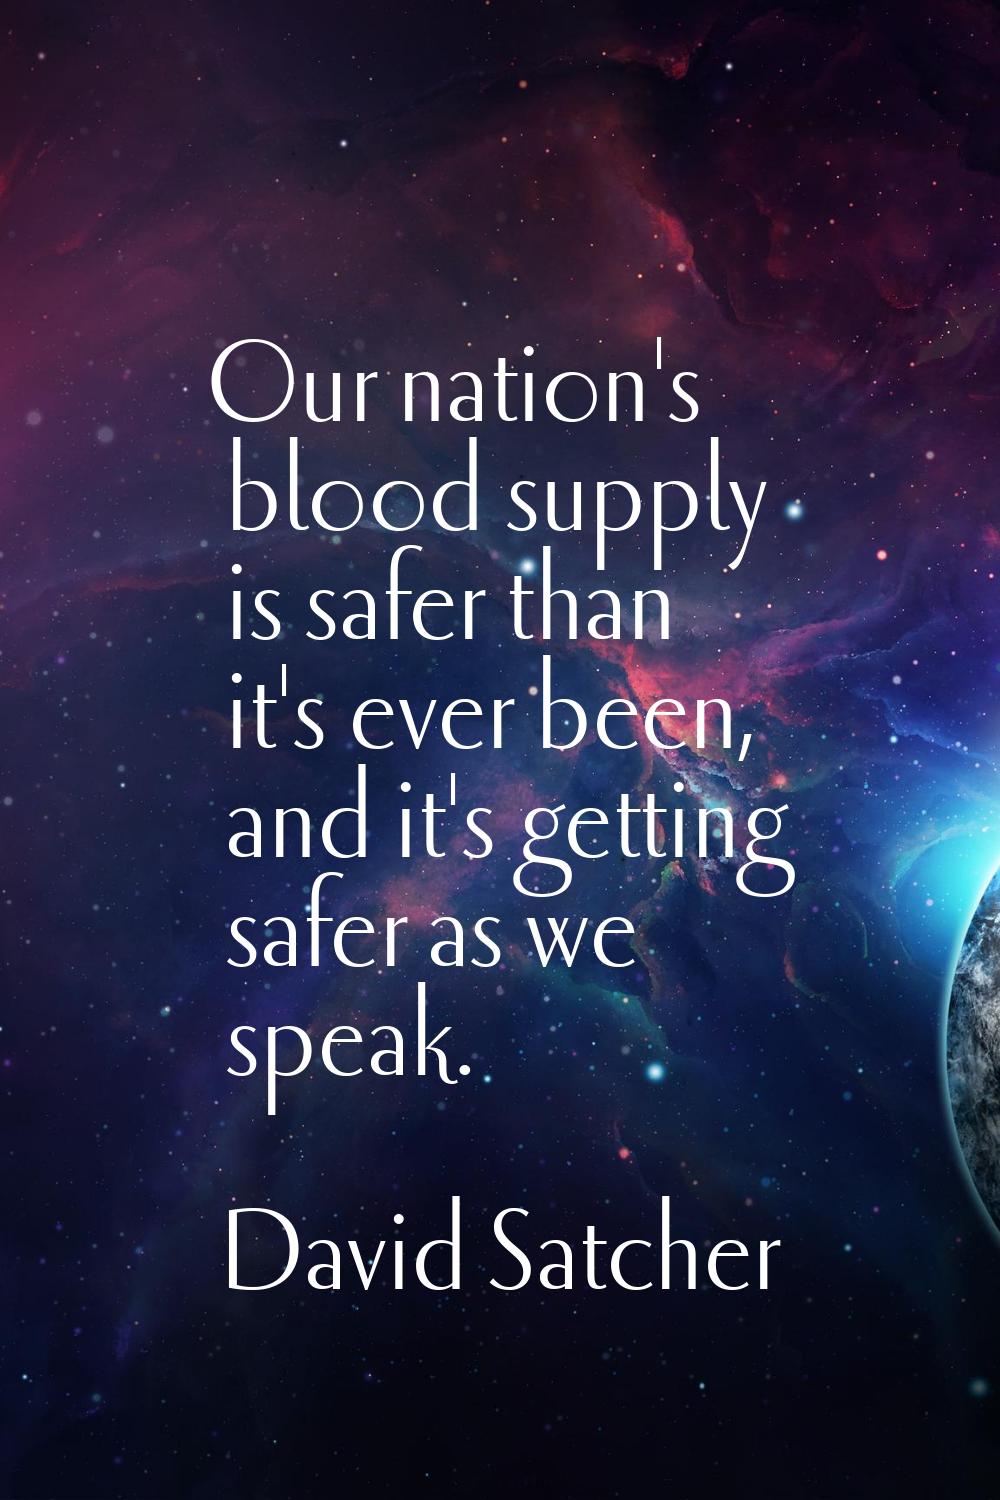 Our nation's blood supply is safer than it's ever been, and it's getting safer as we speak.